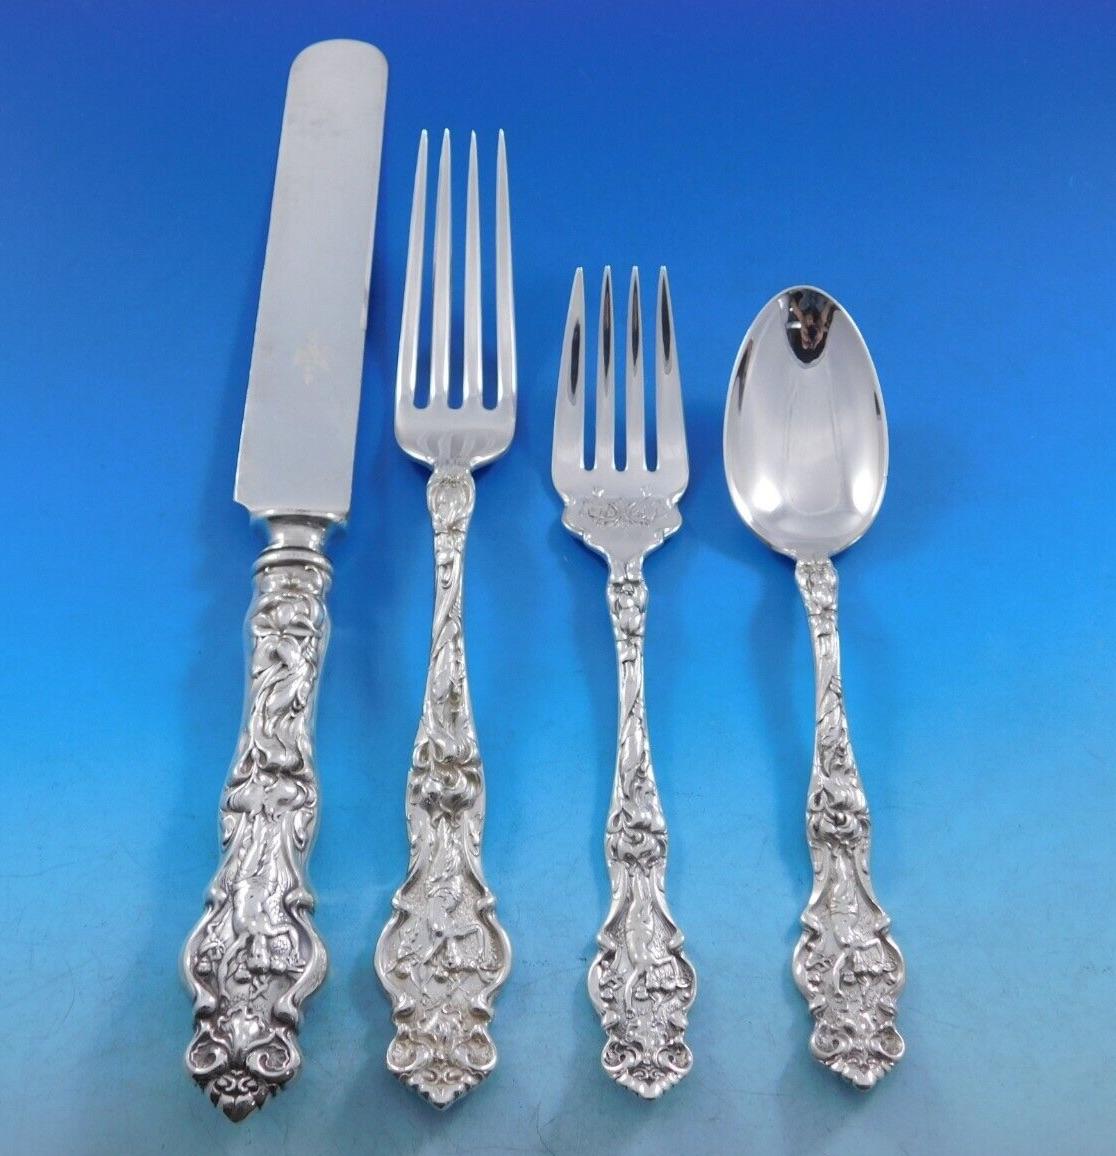 Irian by Wallace Sterling Silver Flatware Set 12 Service 66 Pcs Dinner Figural 4